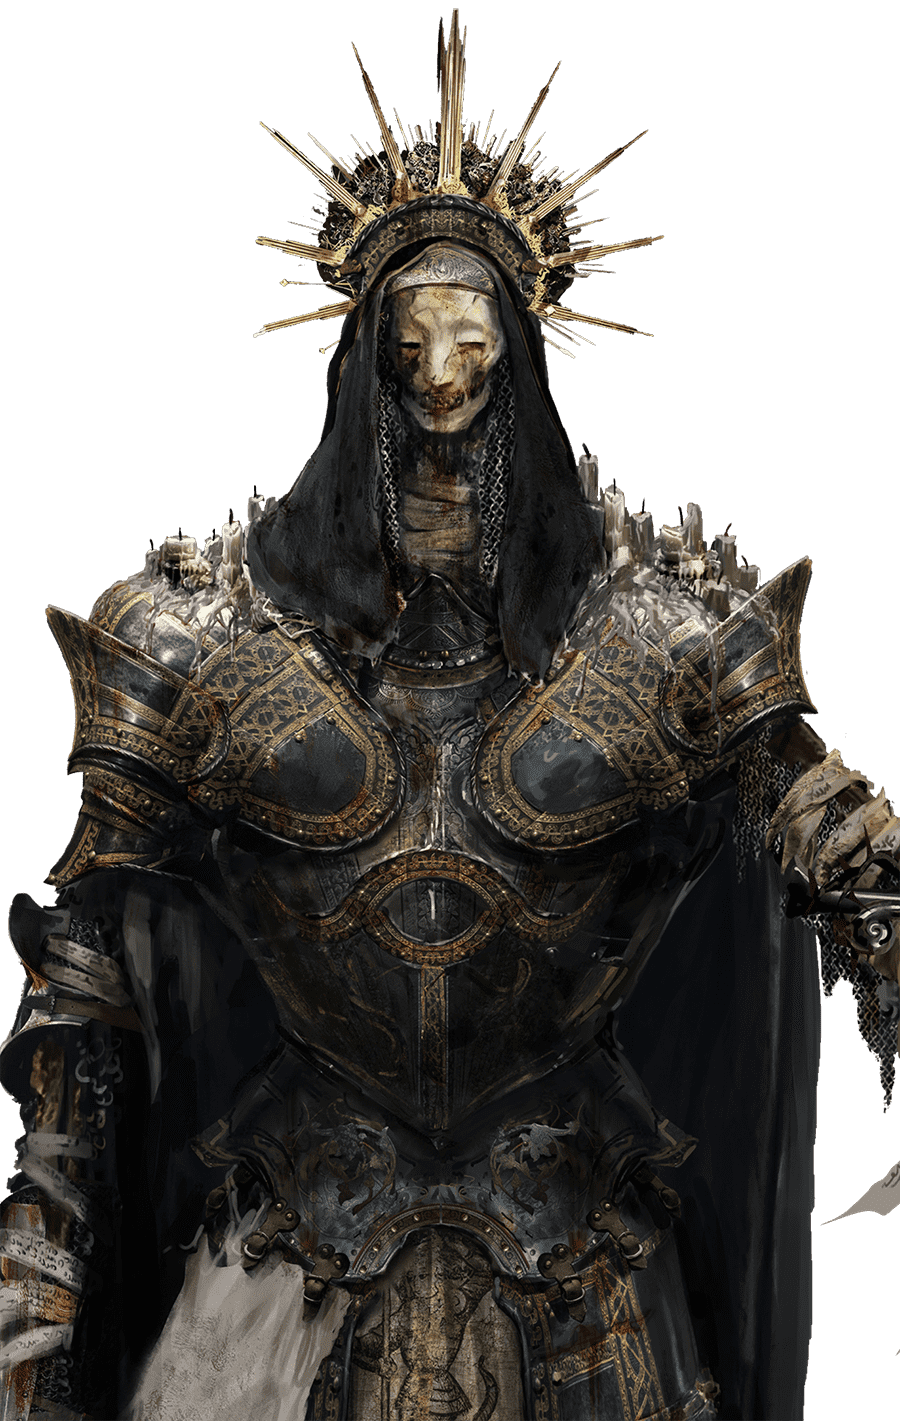 A Holy warrior clad in battle worn armour wearing an iron halo to symbolize his faith in the world of The Lords of the Fallen